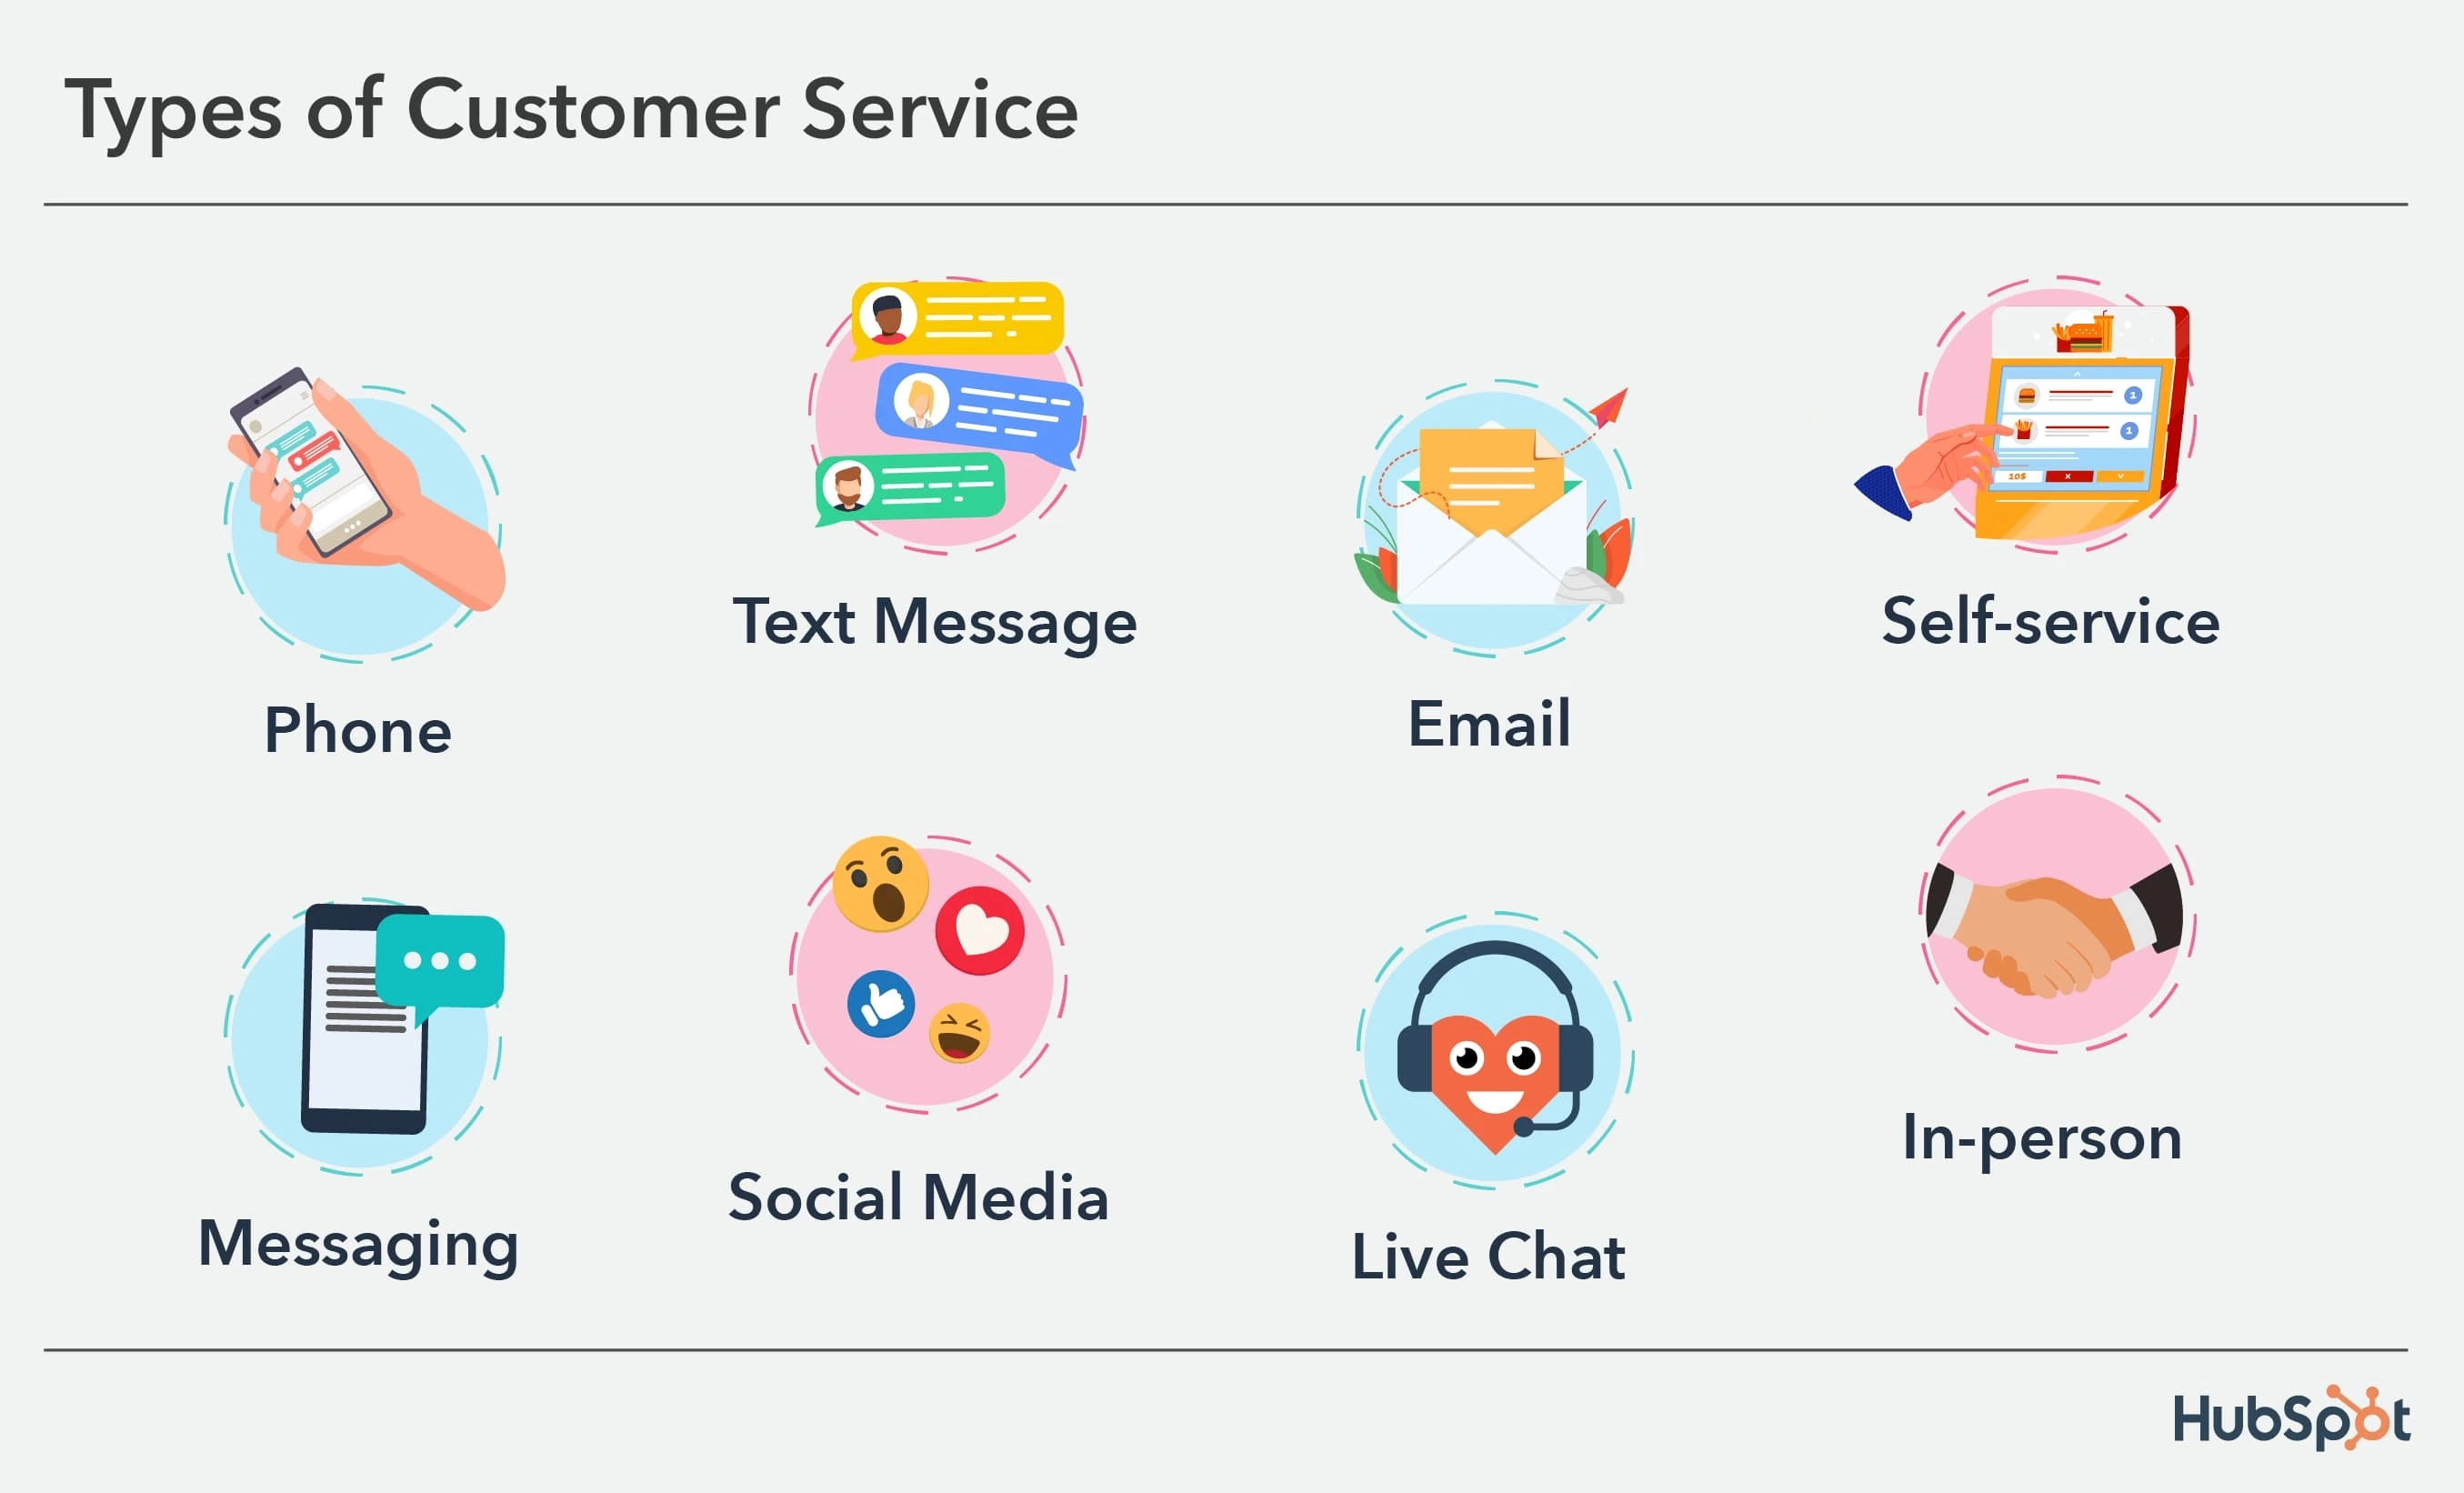 types of customer service: phone, text message, email, self-service, messaging, social media, live chat, in-person